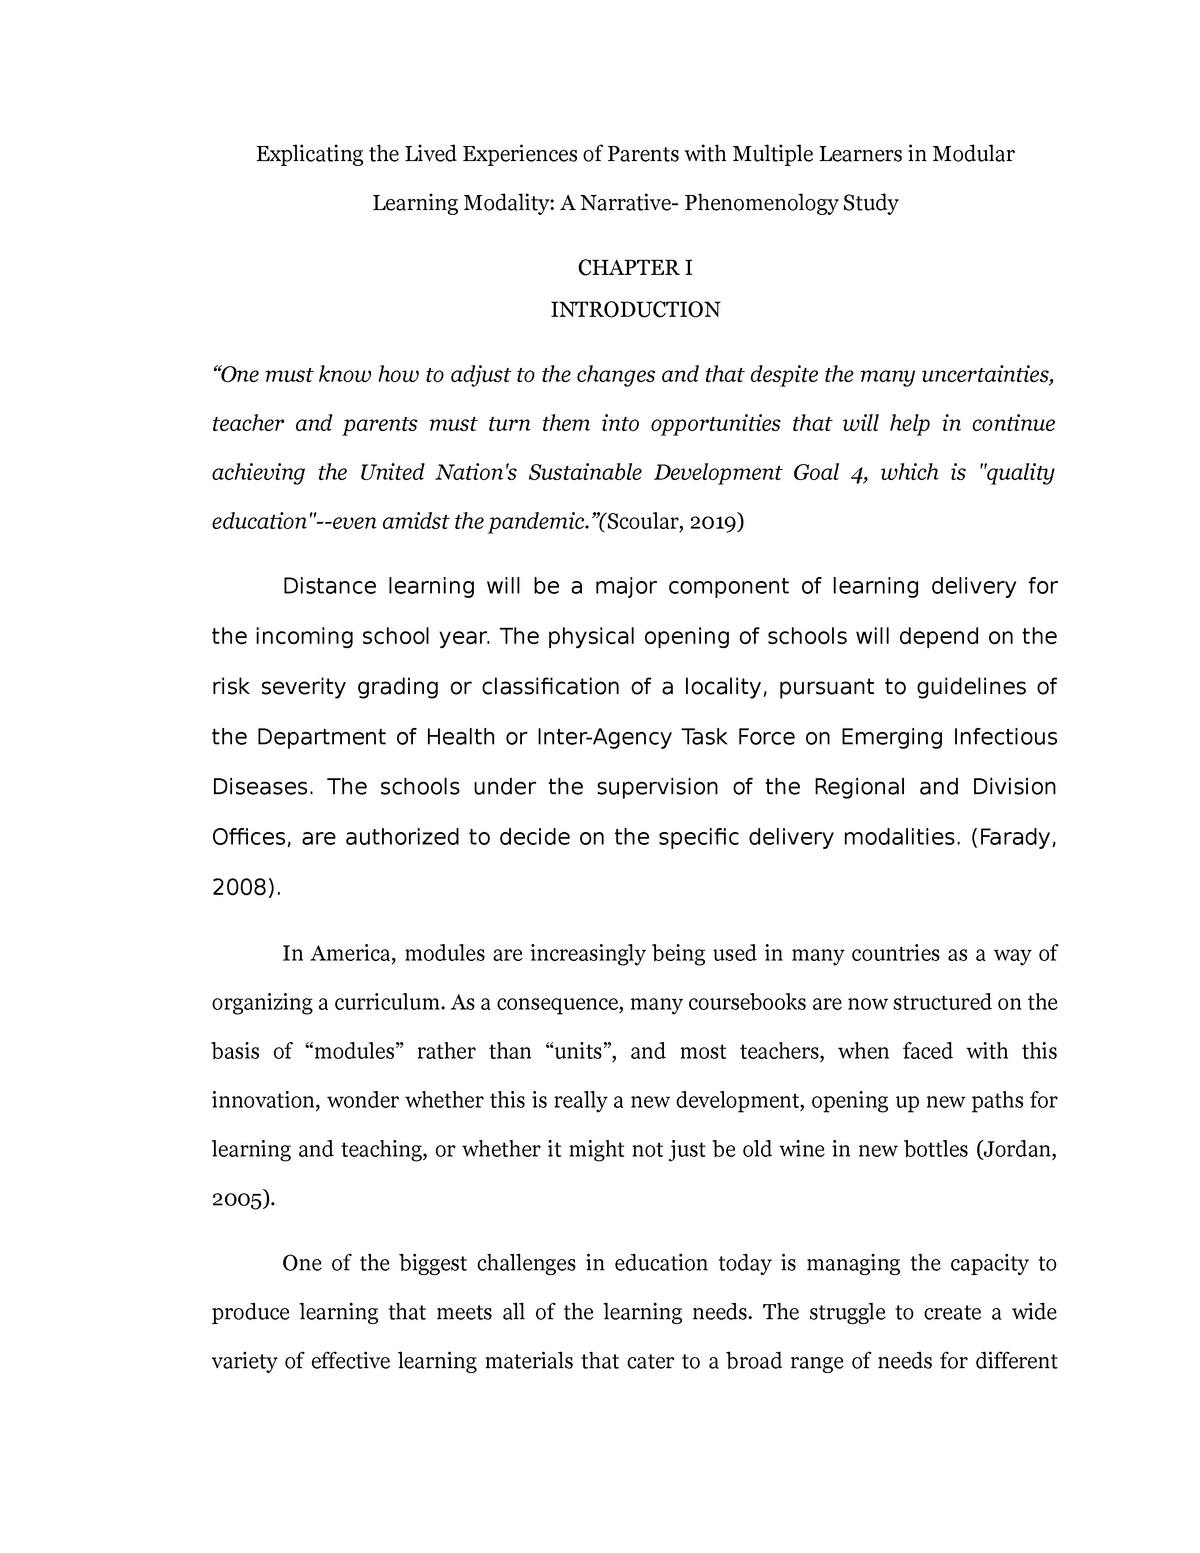 research paper introduction about modular learning